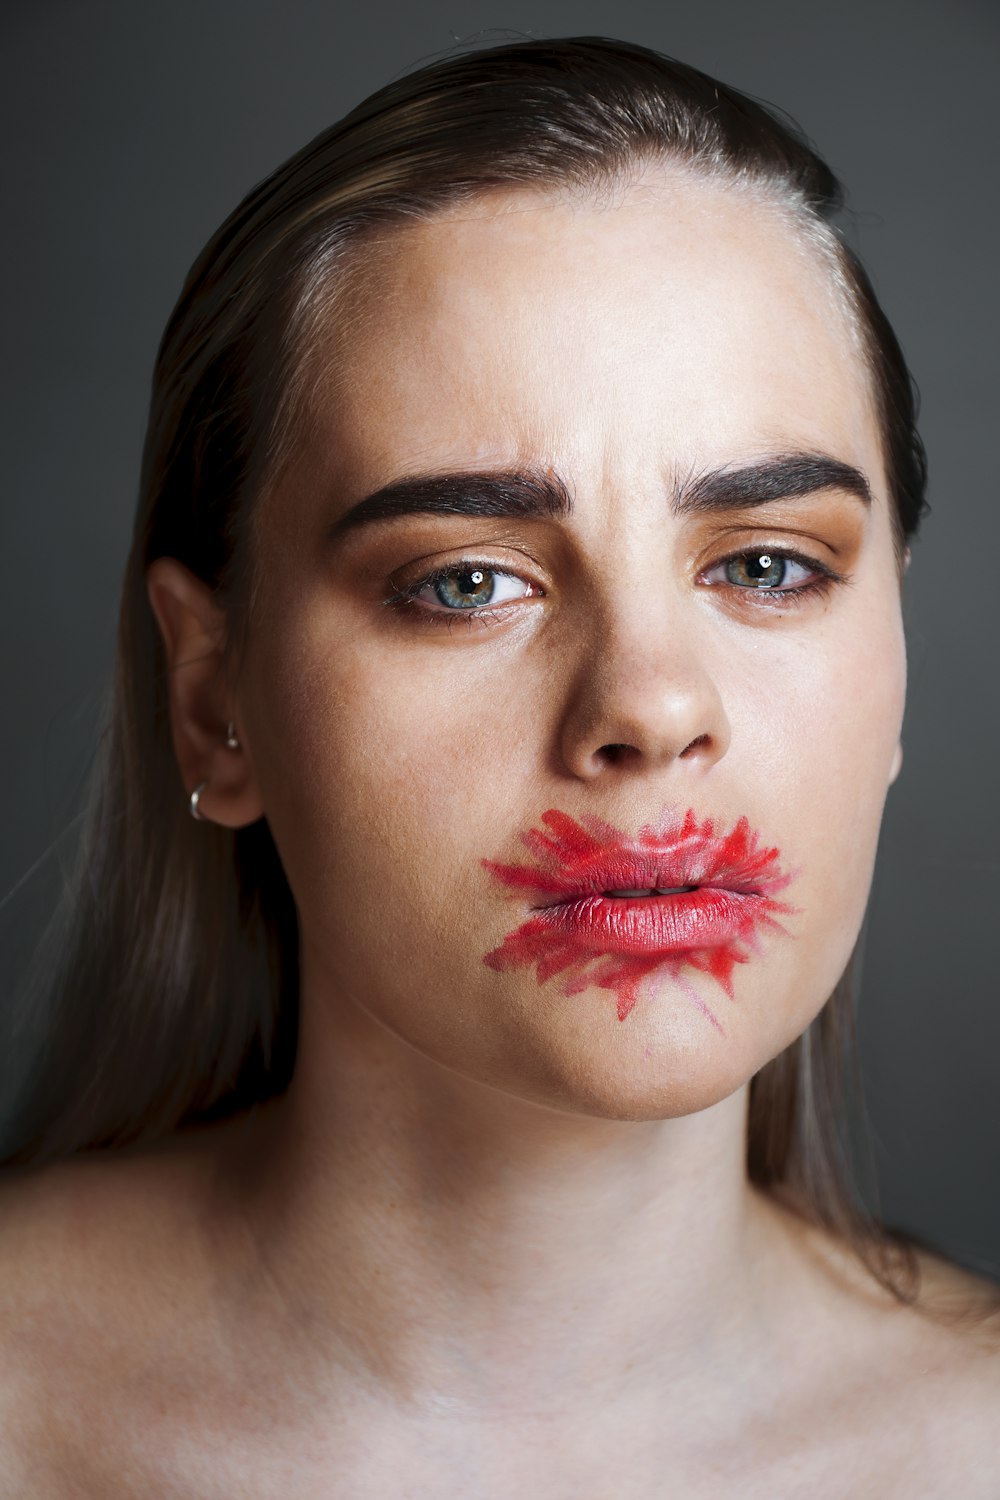 a woman with red lipstick on her face